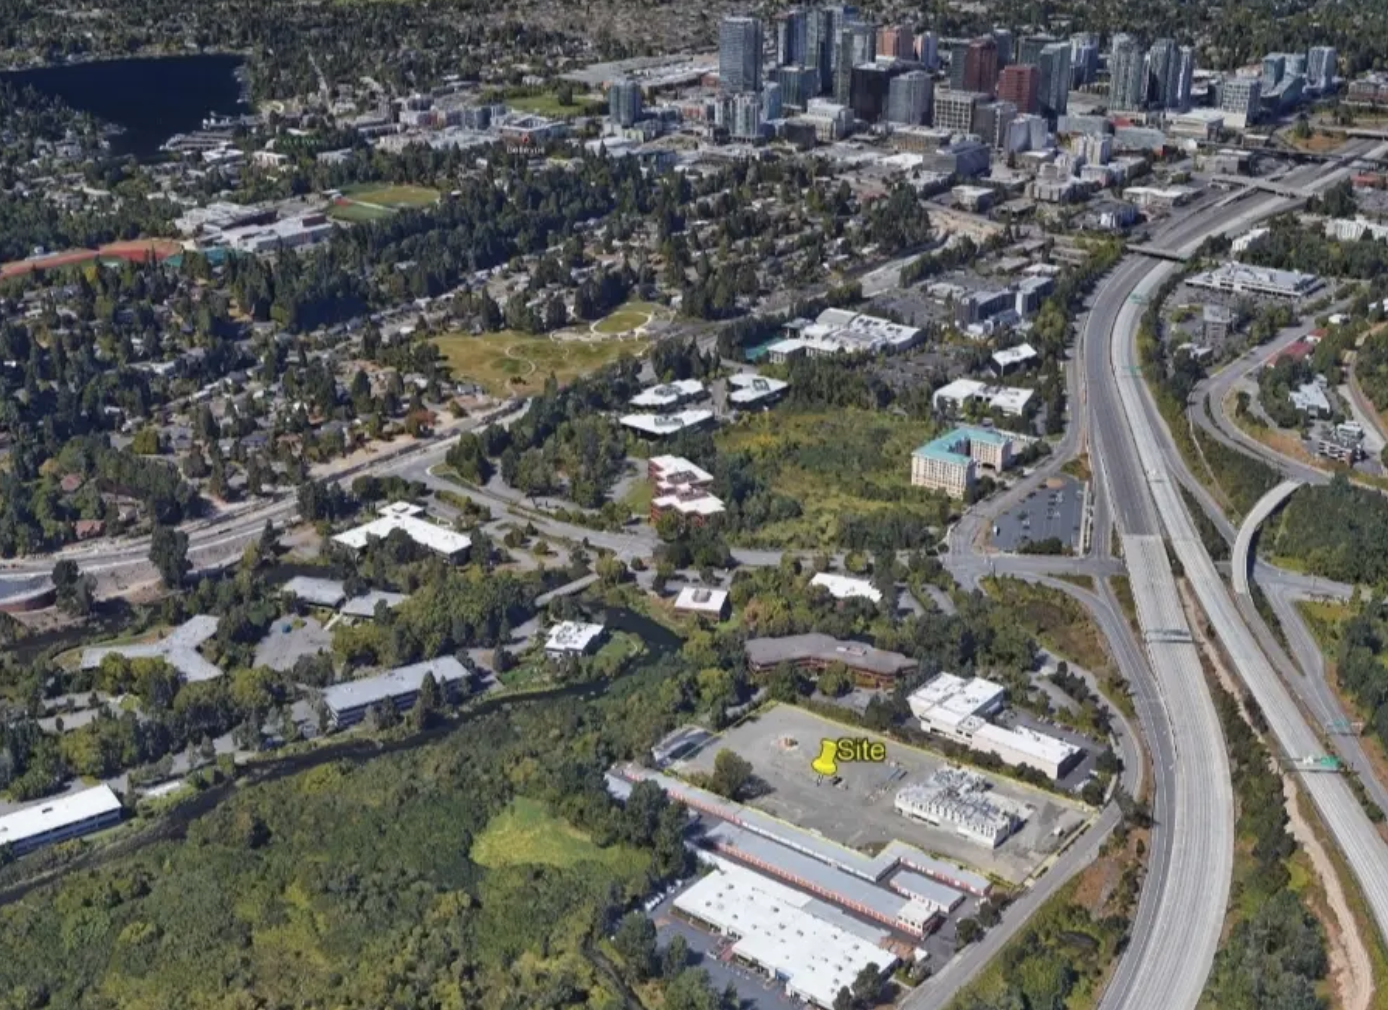 Local Developers Partner to Build Affordable Housing Near Future Light Rail in Bellevue